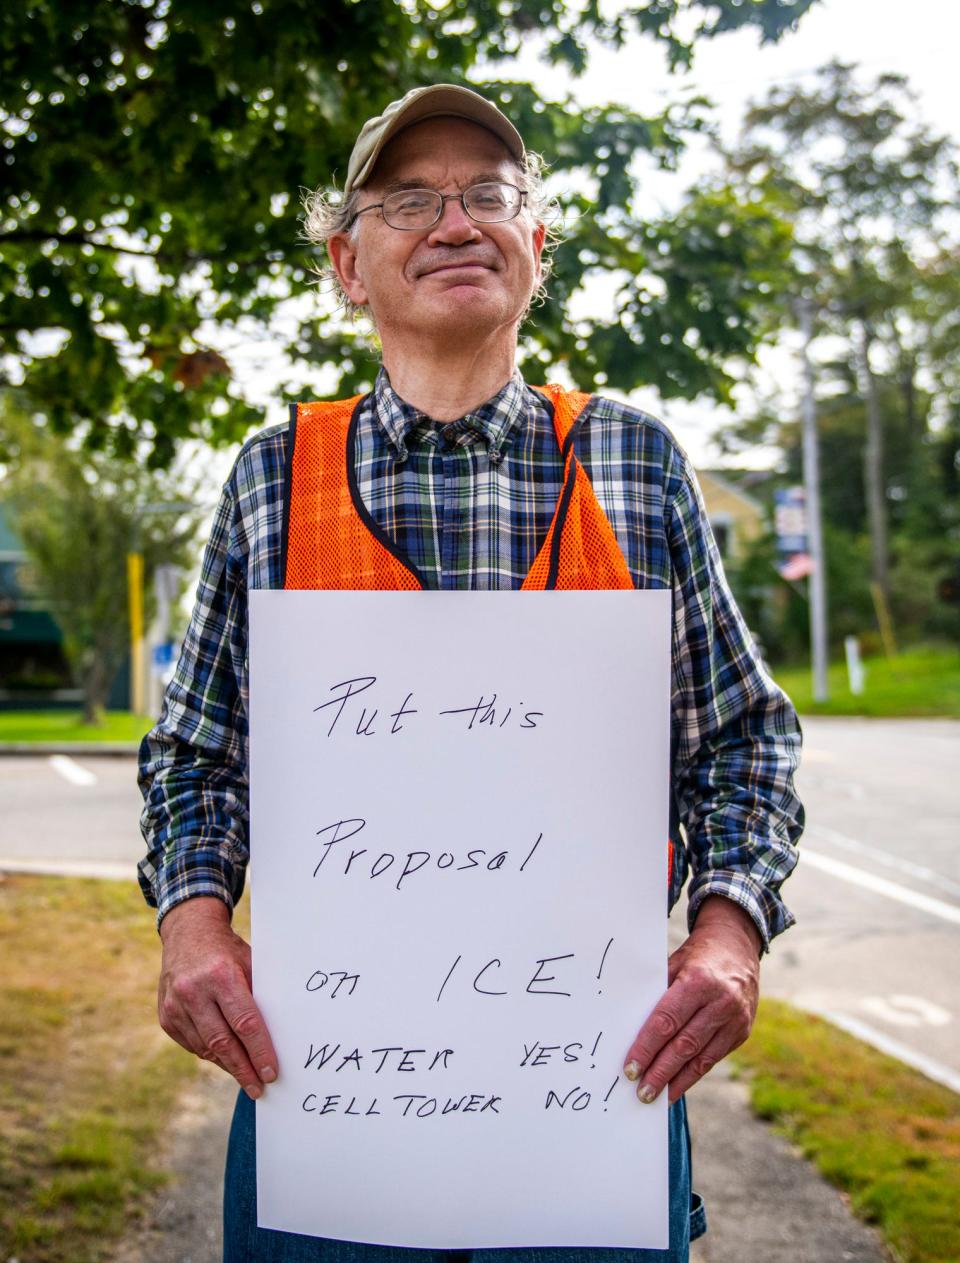 York resident James Kences is seen outside York Town Hall on Friday, Sept. 24, 2021, protesting a proposal to build a cell antenna array atop the Roots Rock Road water tower. Thursday he spoke against another cell project before the Planning Board being proposed in York Village.